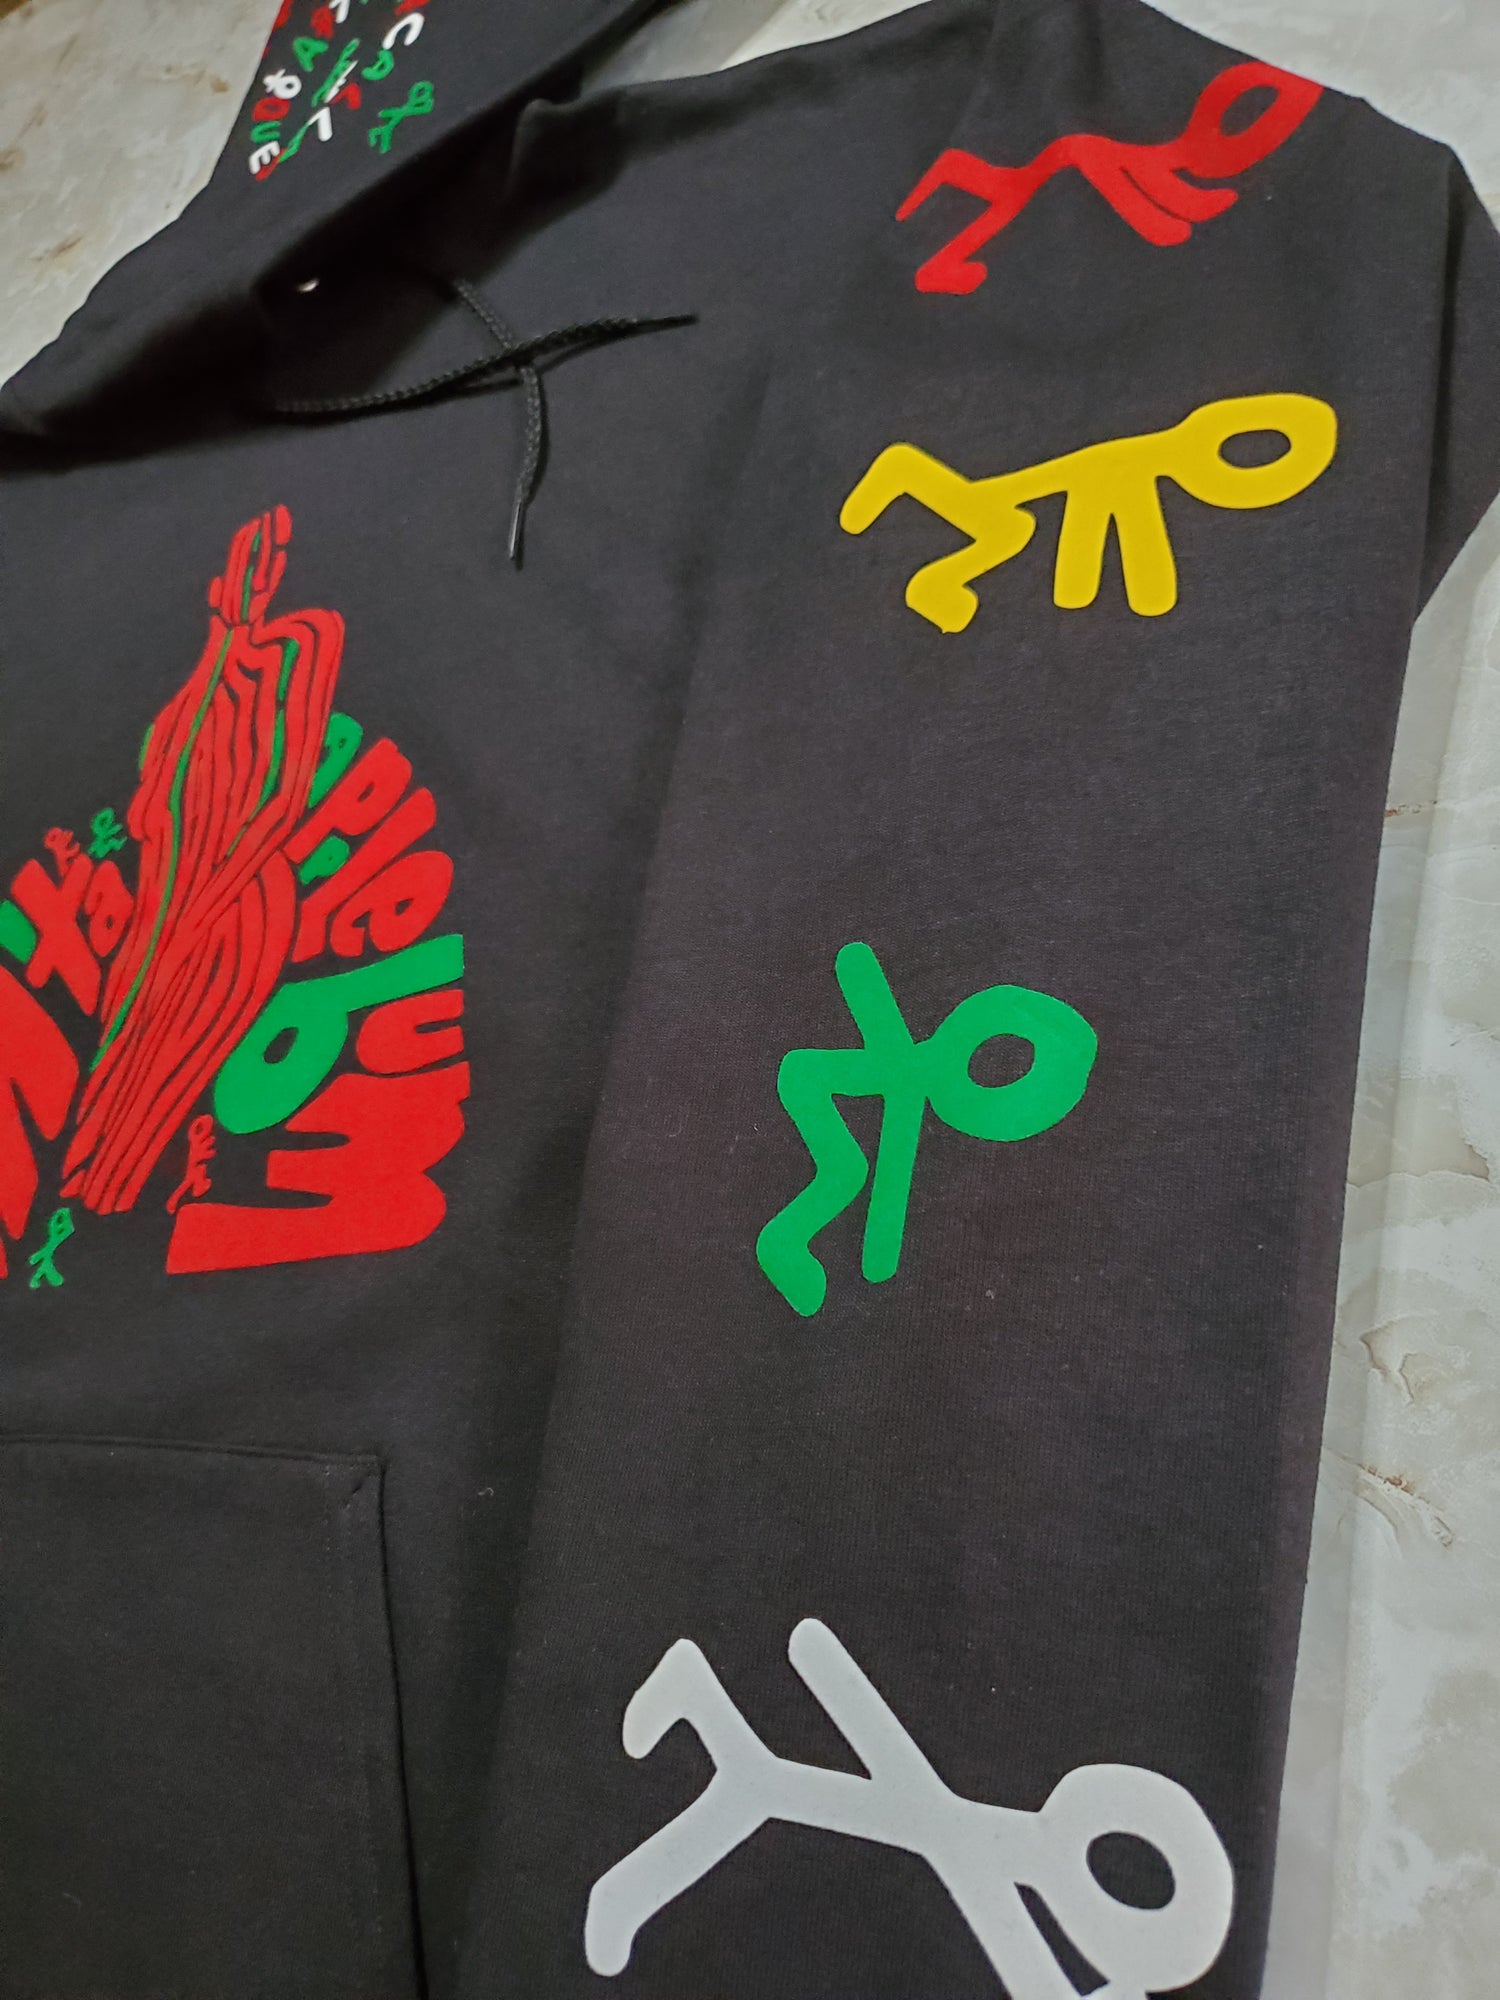 ATCQ Tribute Hoodie - Centre Ave Clothing Co.